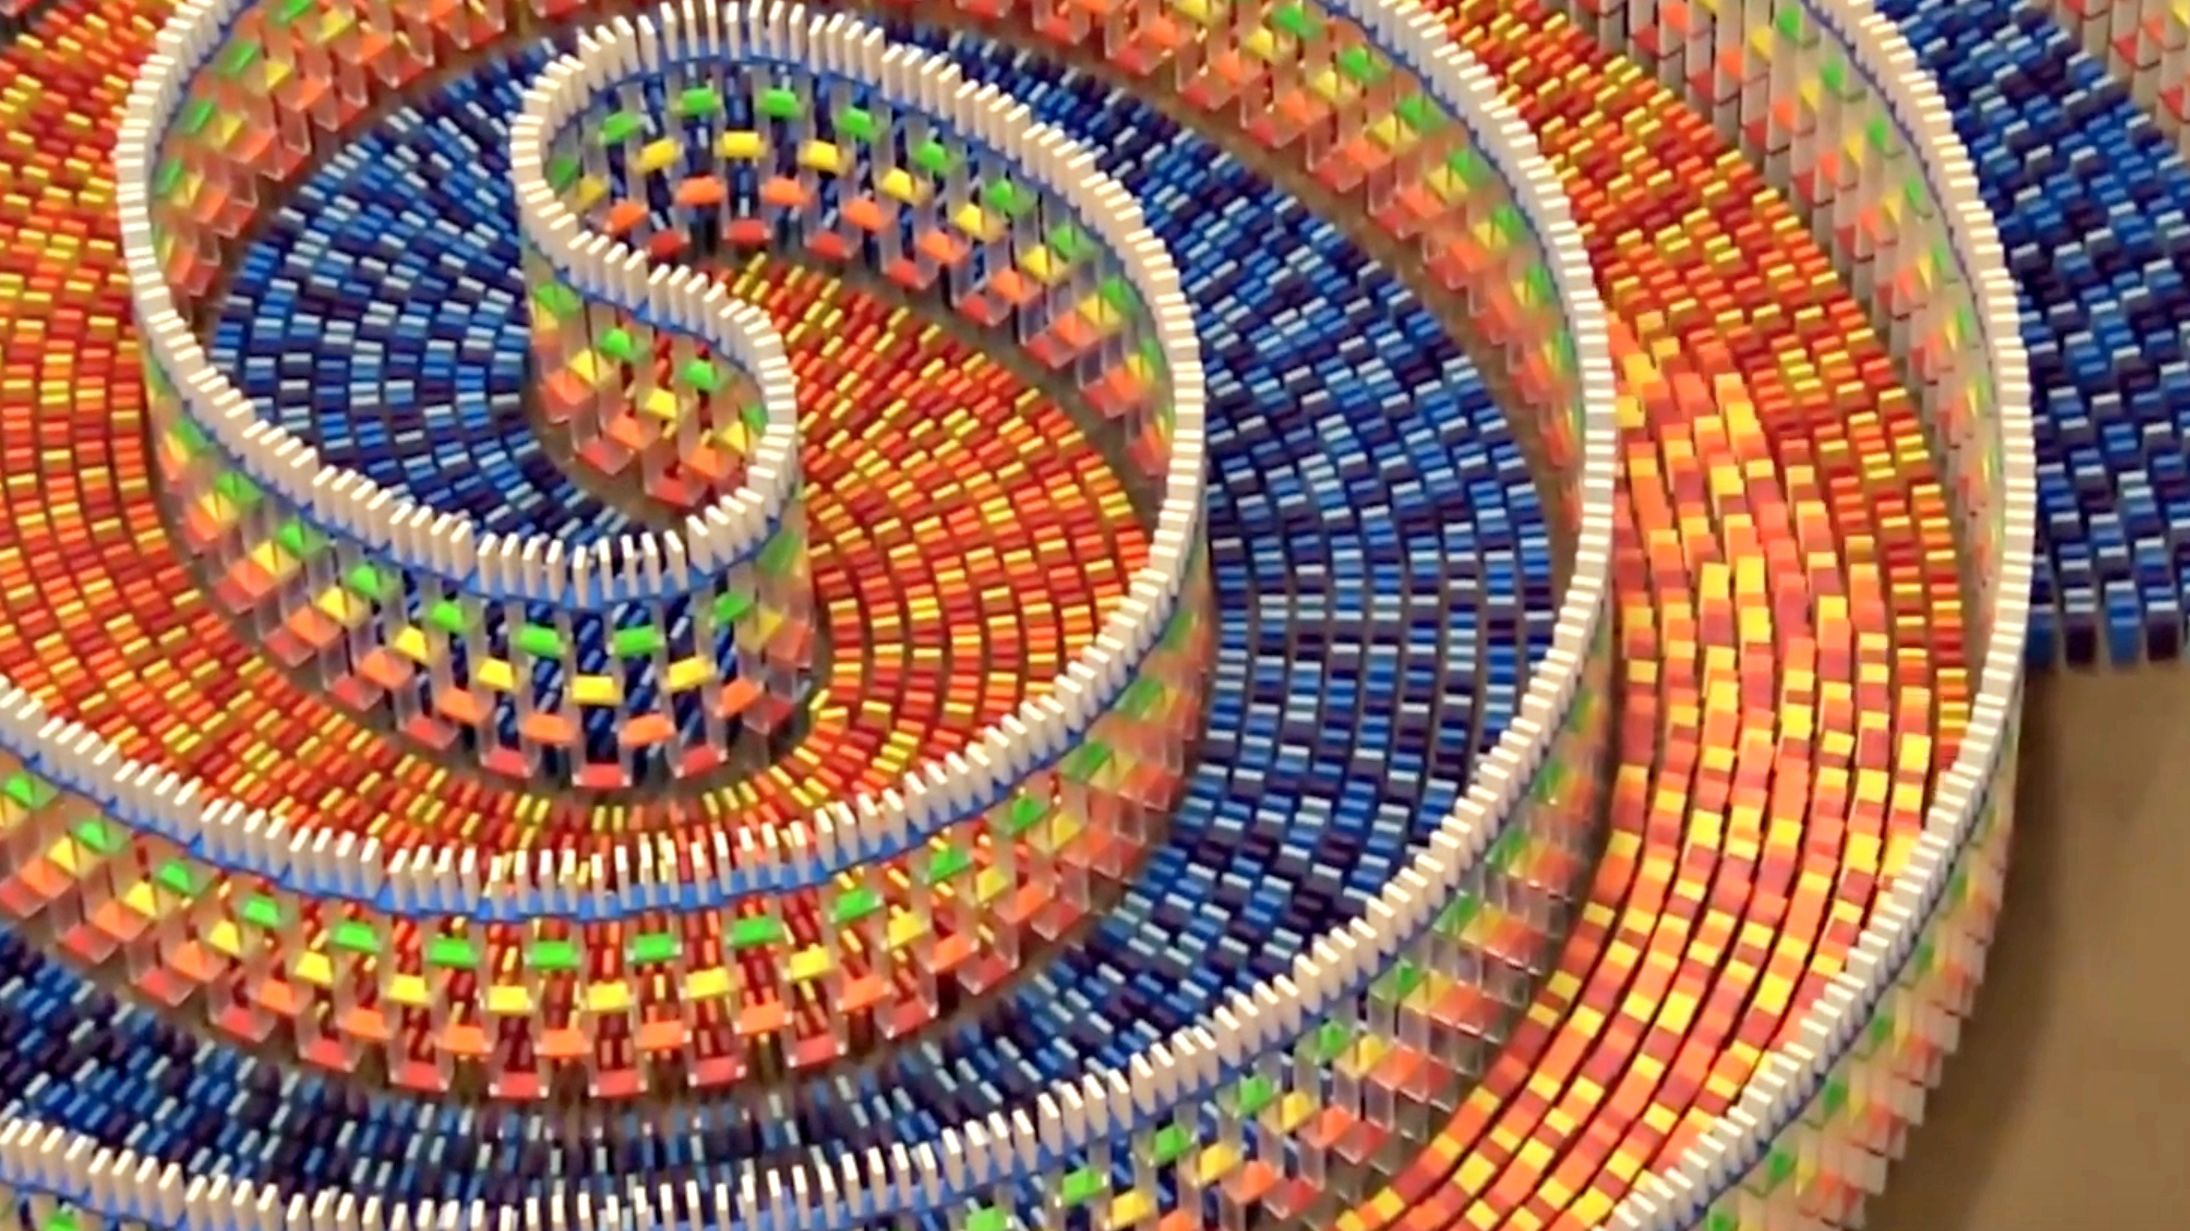 Lily Hevesh's Domino Creations Are Mesmerizing | Video | Mental Floss